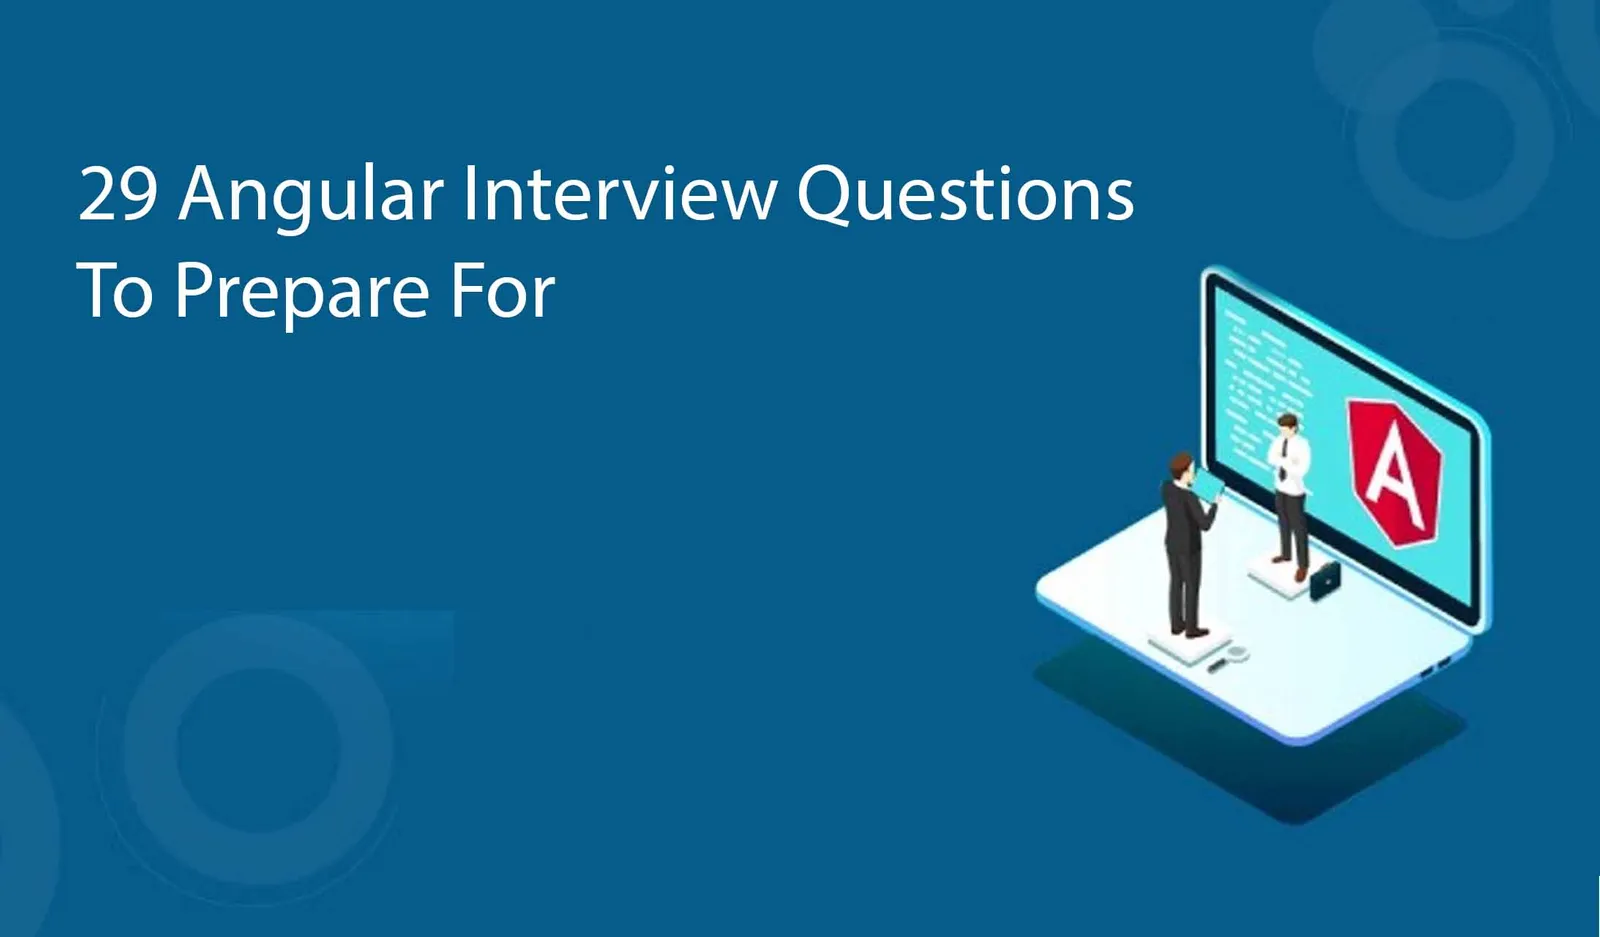 29 Angular Interview Questions To Prepare For